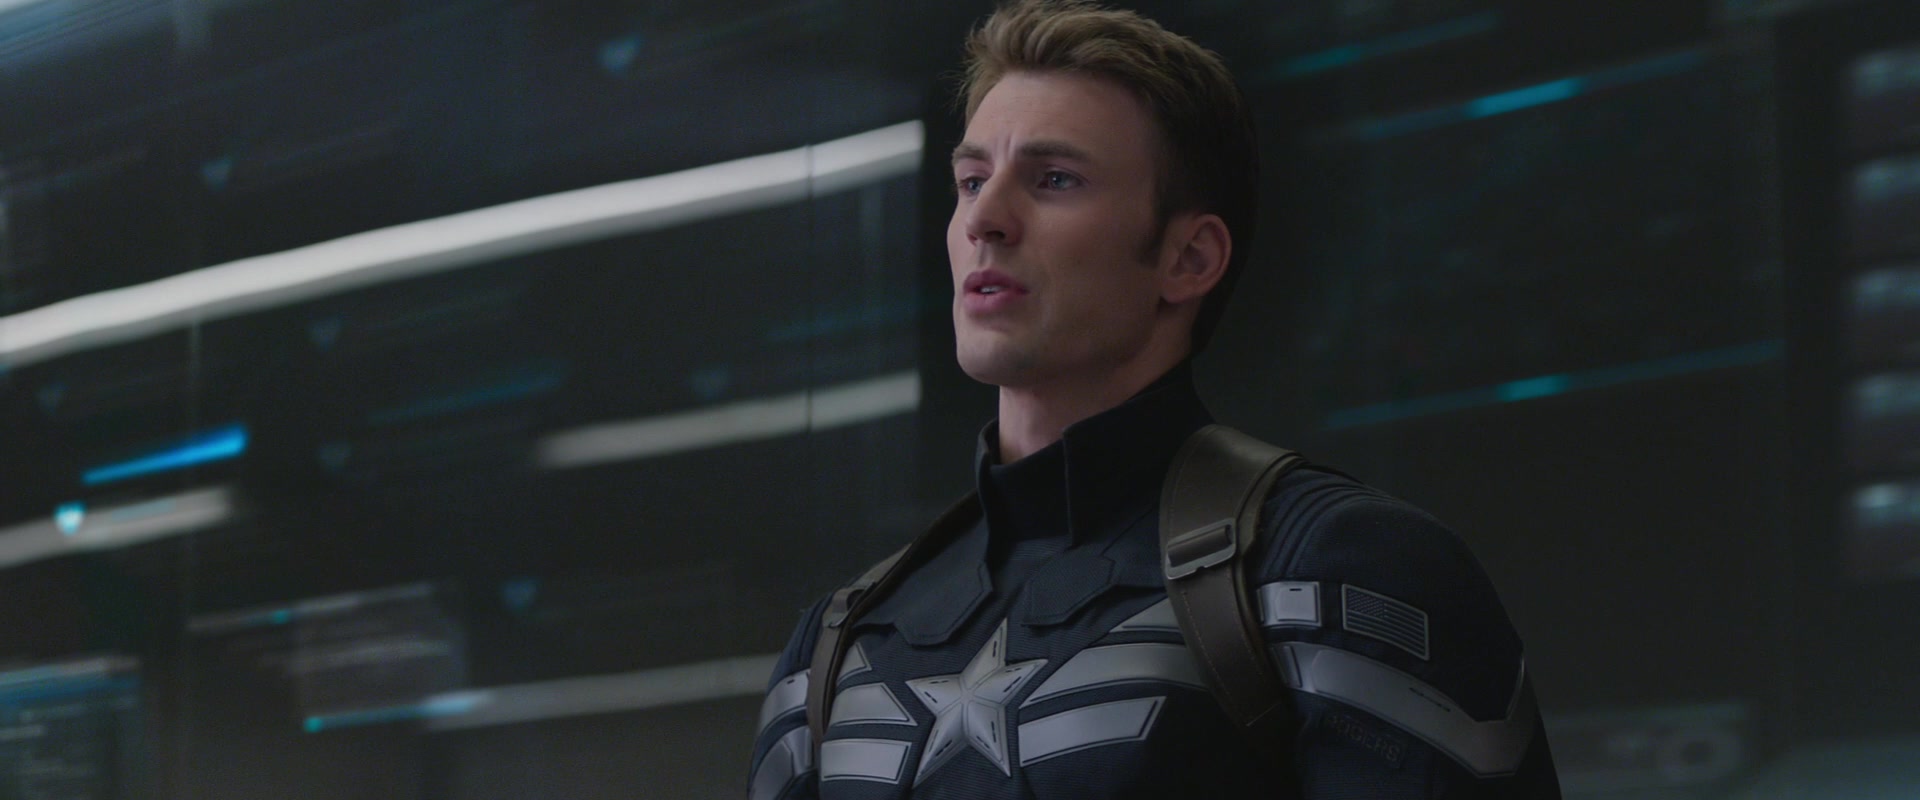 Steve Rogers (Chris Evans) gives a sit-rep update in Captain America: The Winter Soldier (2014), Marvel Entertainment